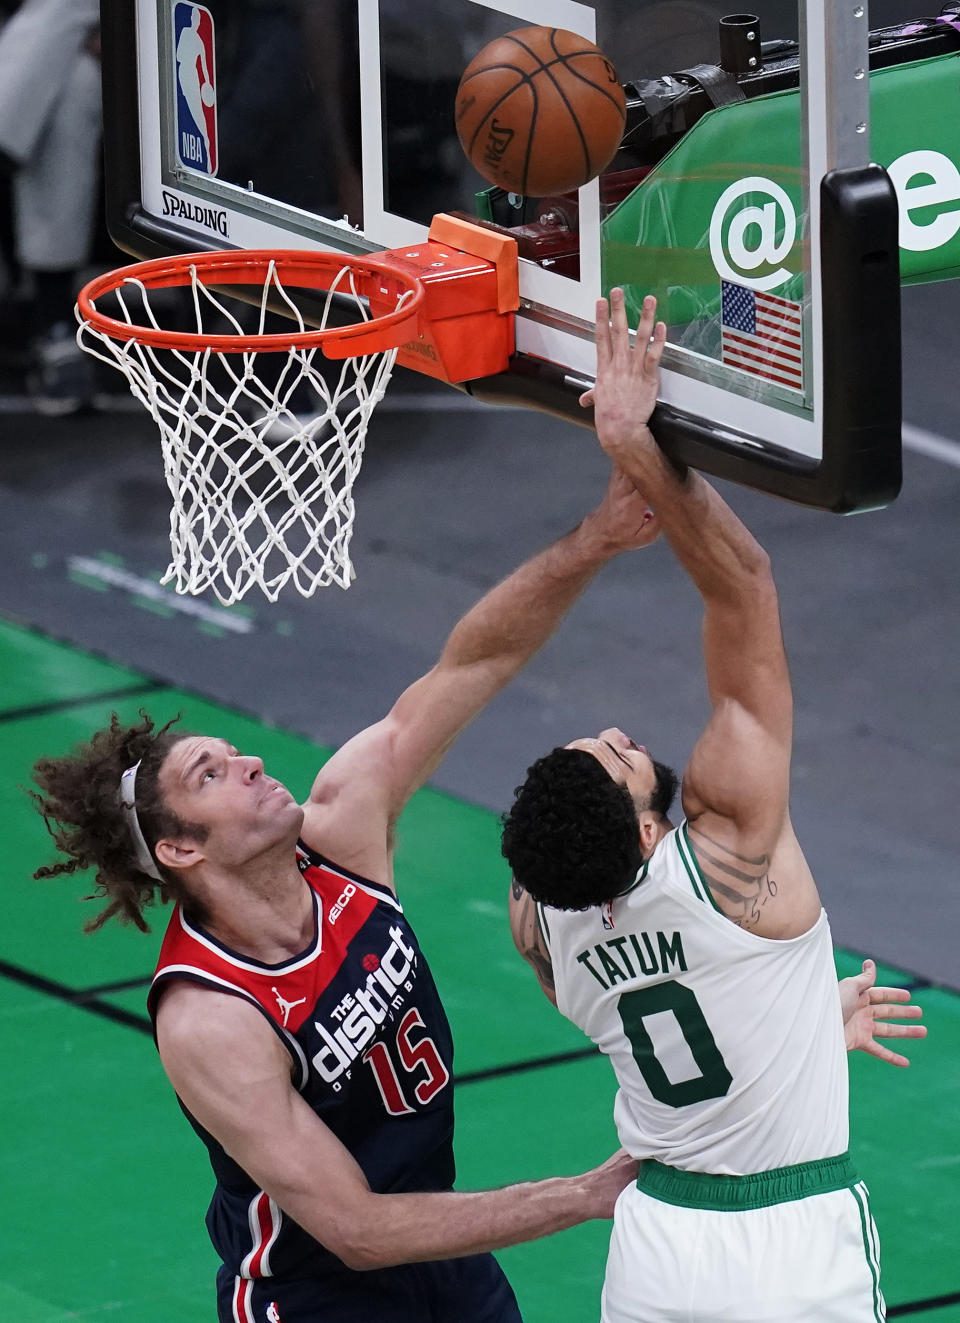 Boston Celtics forward Jayson Tatum (0) drives to the basket past Washington Wizards center Robin Lopez (15) during the first half of an NBA basketball Eastern Conference Play-in game, Tuesday, May 18, 2021, in Boston. (AP Photo/Charles Krupa)